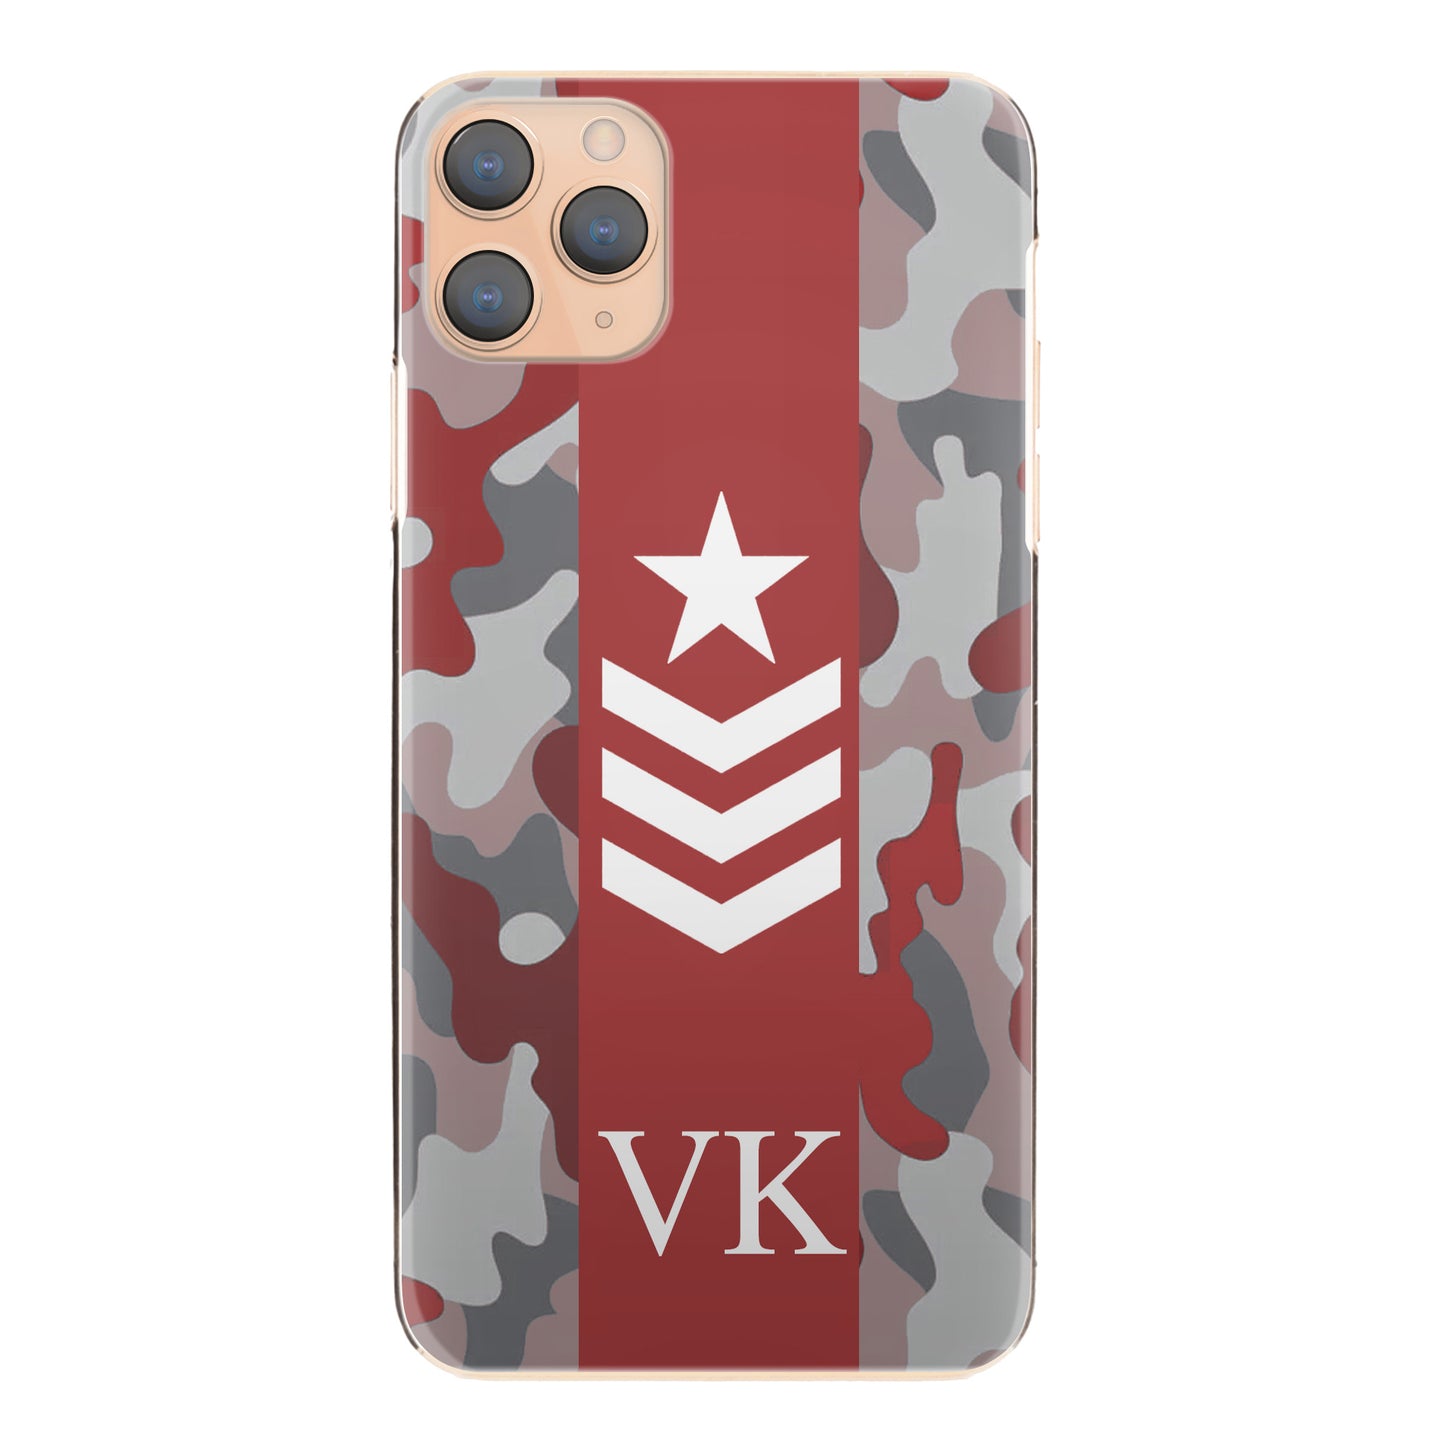 Personalised One Phone Hard Case with Initials and Army Rank on Red Camo